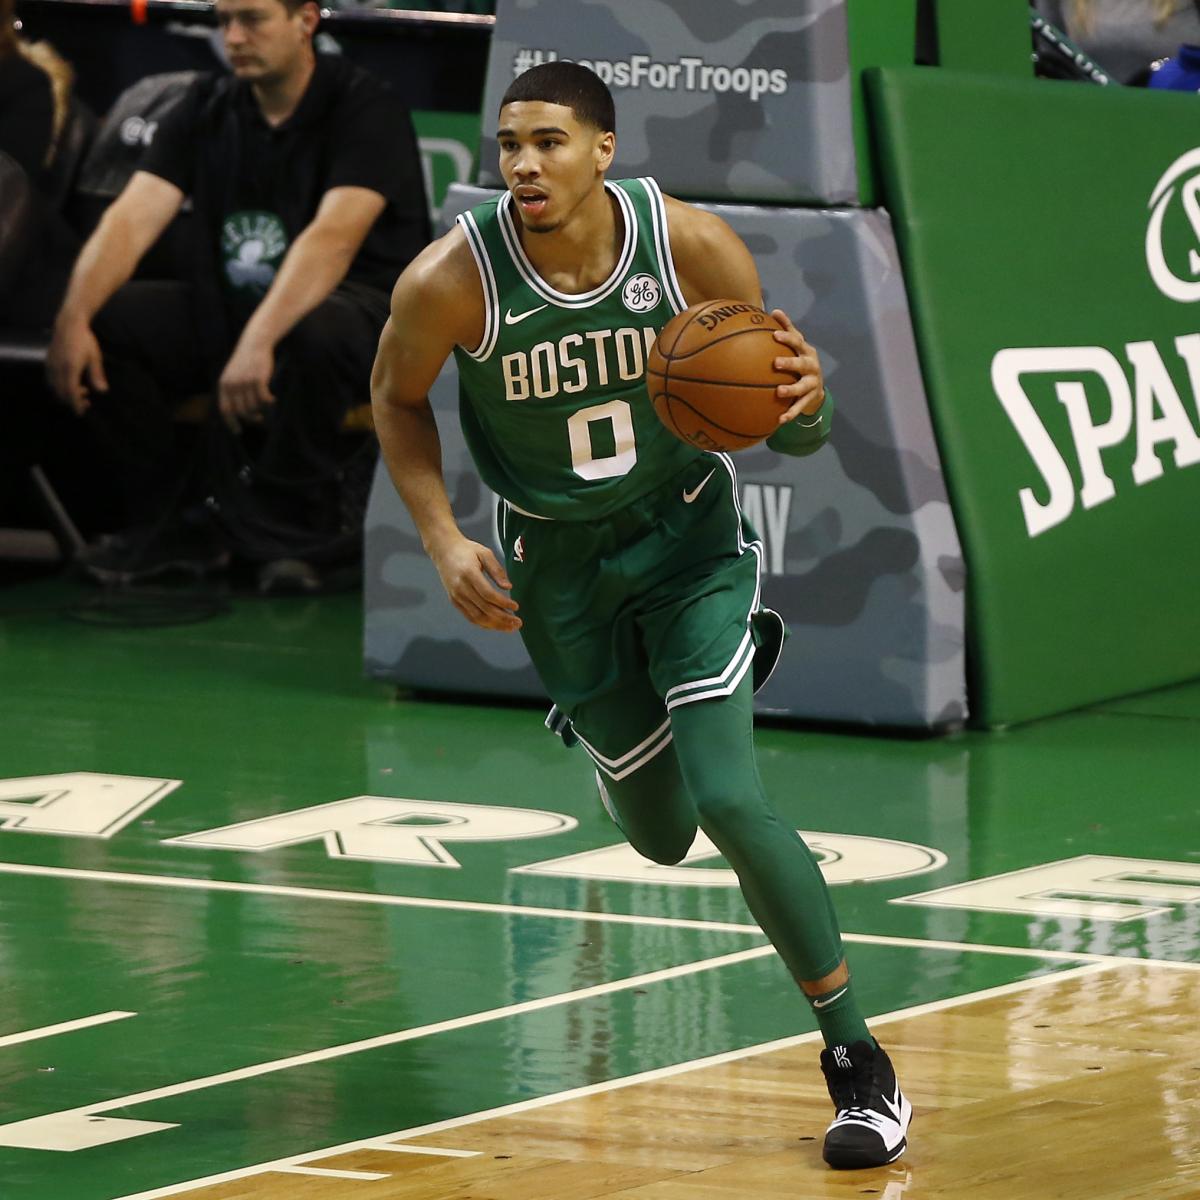 Jayson Tatum grew up hating Celtics, wanted to play for Lakers